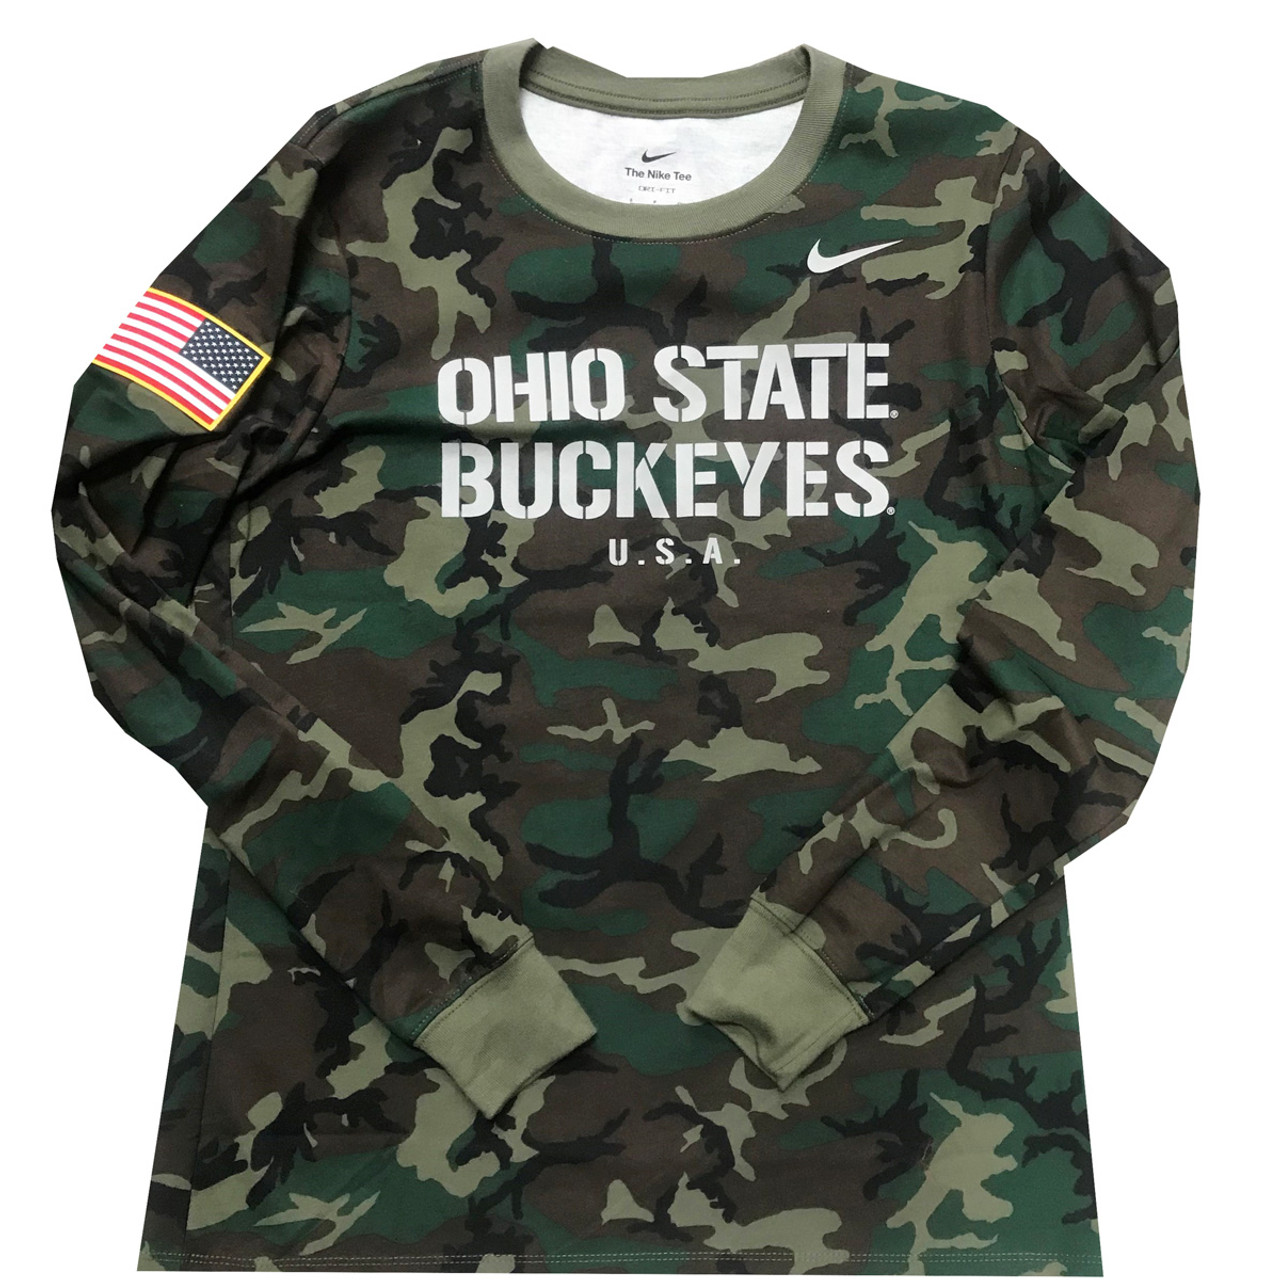 Rond en rond Geniet Senaat Womens Nike Long Sleeve Camo Print Military Shirt with American Flag and  Ohio St - College Traditions